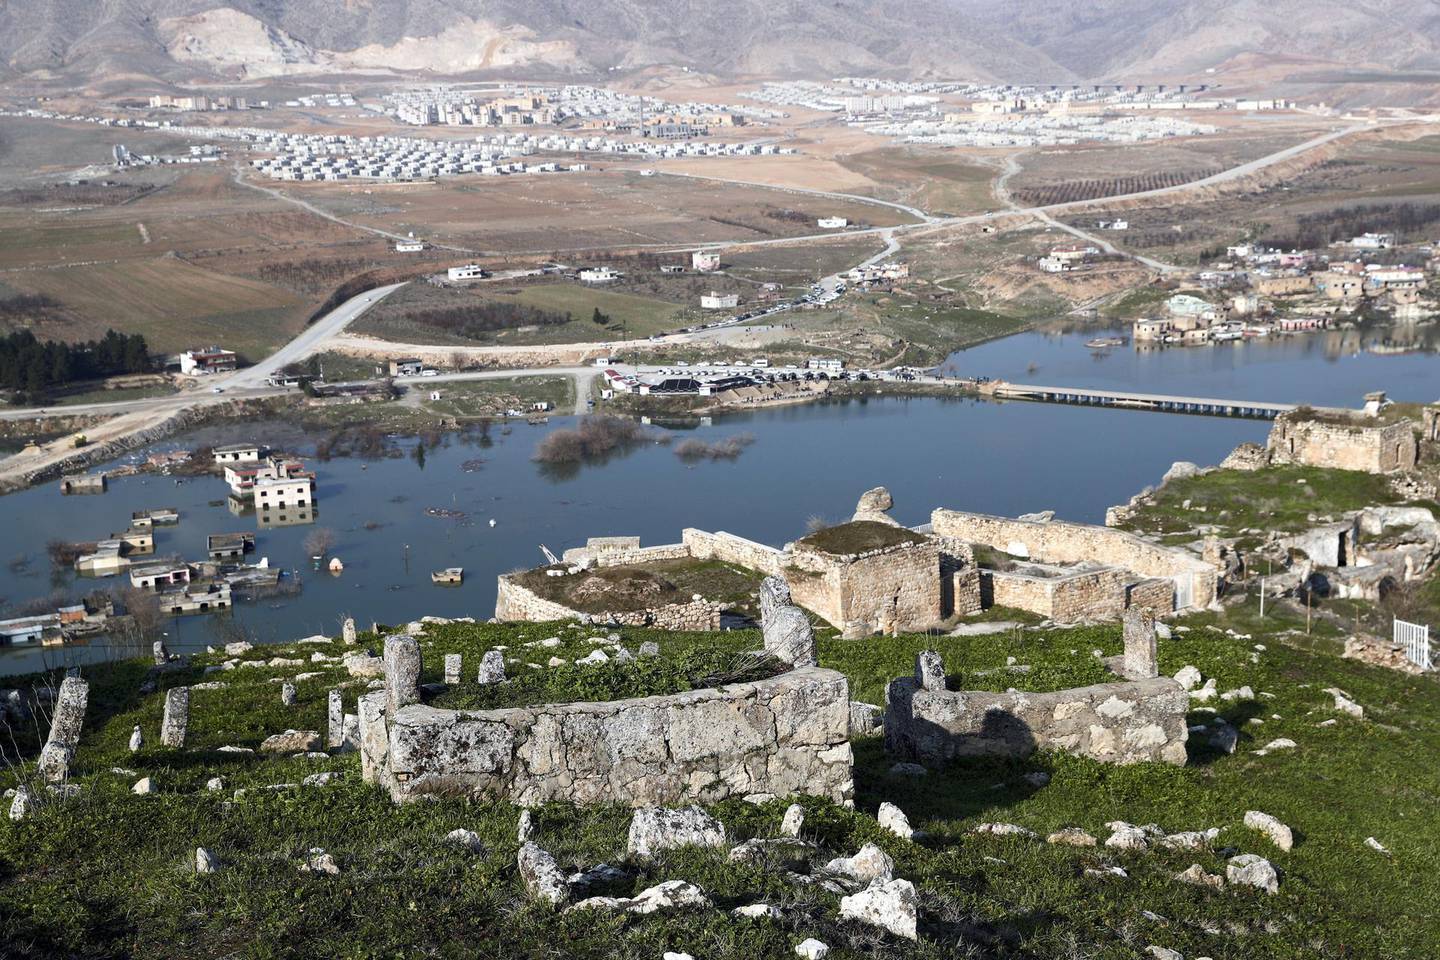 An old cemetery is seen in Hasankeyf, which will be significantly submerged by the Ilisu Dam, with new Hasankeyf in the background in southeastern Batman province, Turkey, February 20, 2020. Picture taken February 20, 2020. REUTERS/Murad Sezer